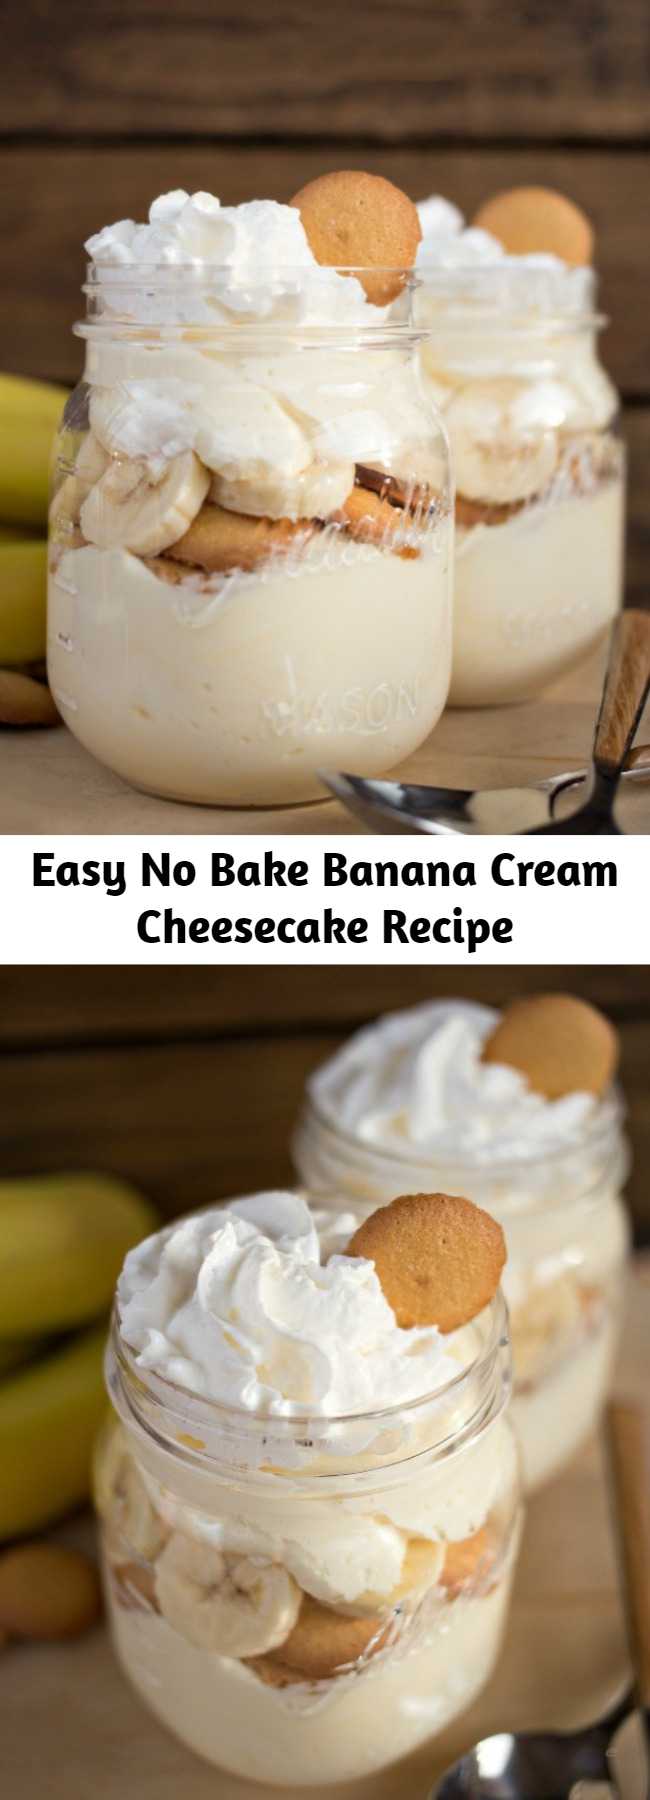 Easy No Bake Banana Cream Cheesecake Recipe - A delicious no-fuss, easy dessert that will have you enjoying your favorite Banana Cream Pie flavors in just minutes!